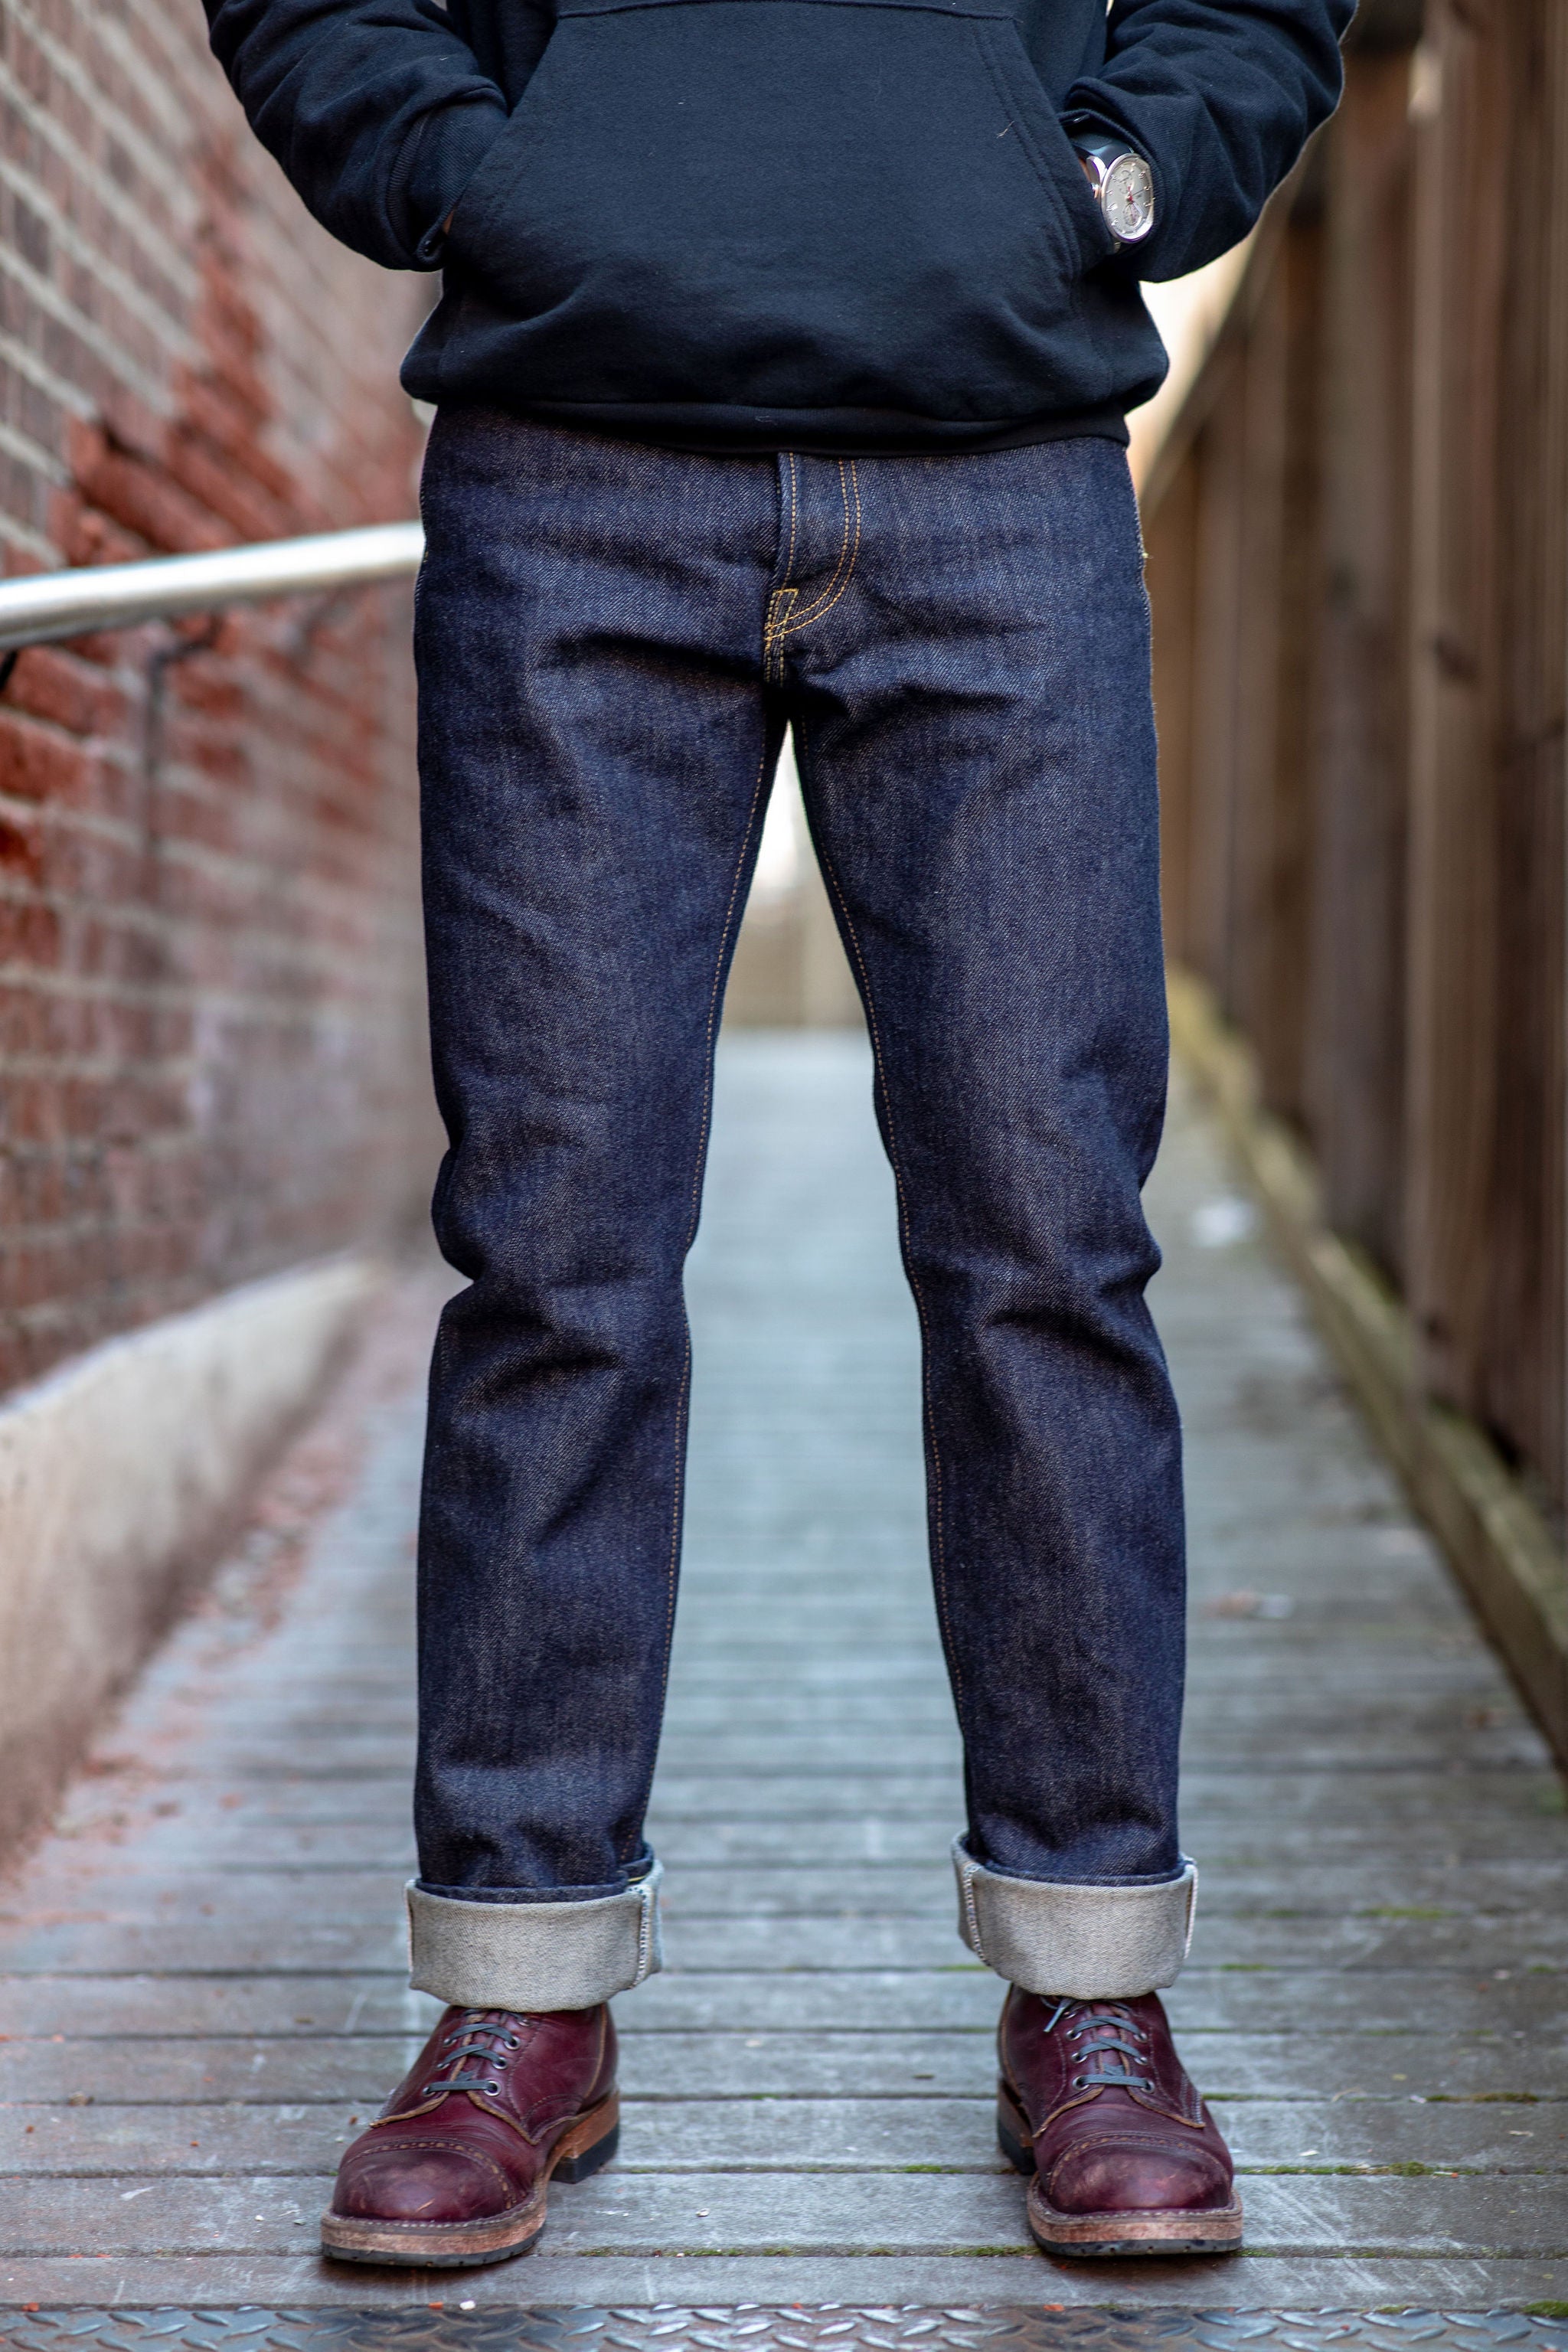 low rise jeans out of style